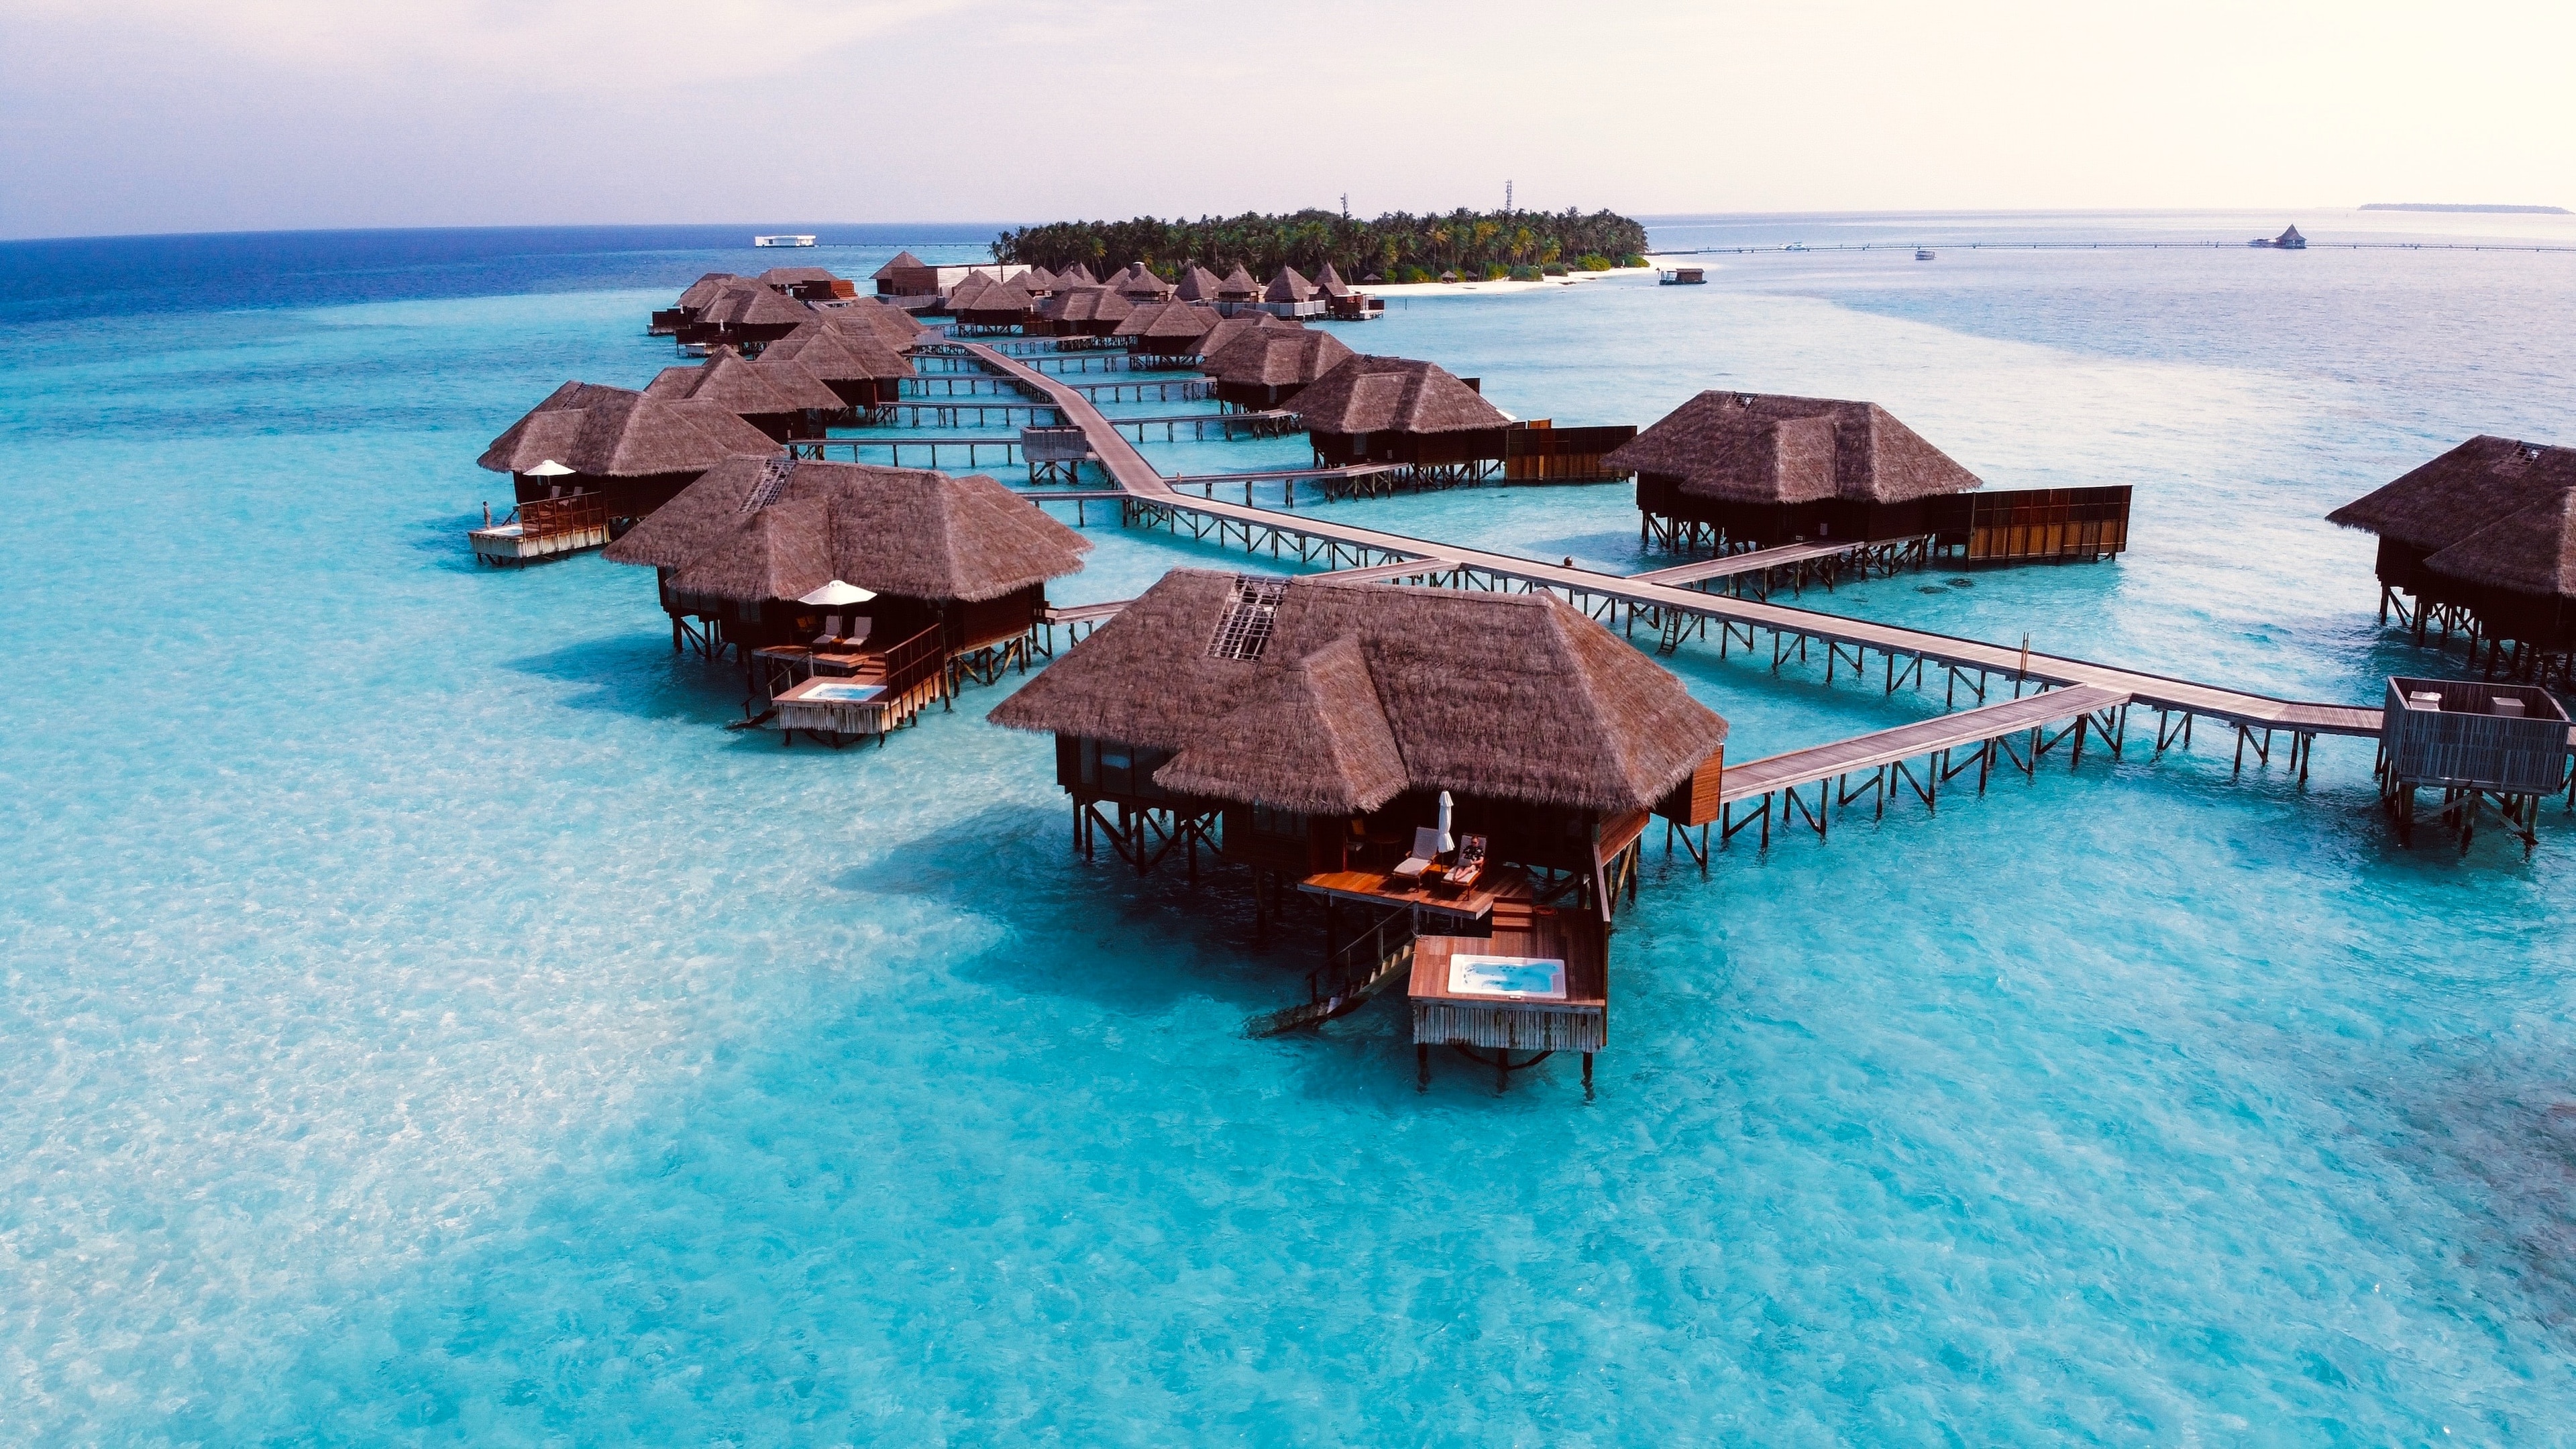 A Travel Guide to the Maldives: Things to Do, Places to Explore, and the Best Season to Visit